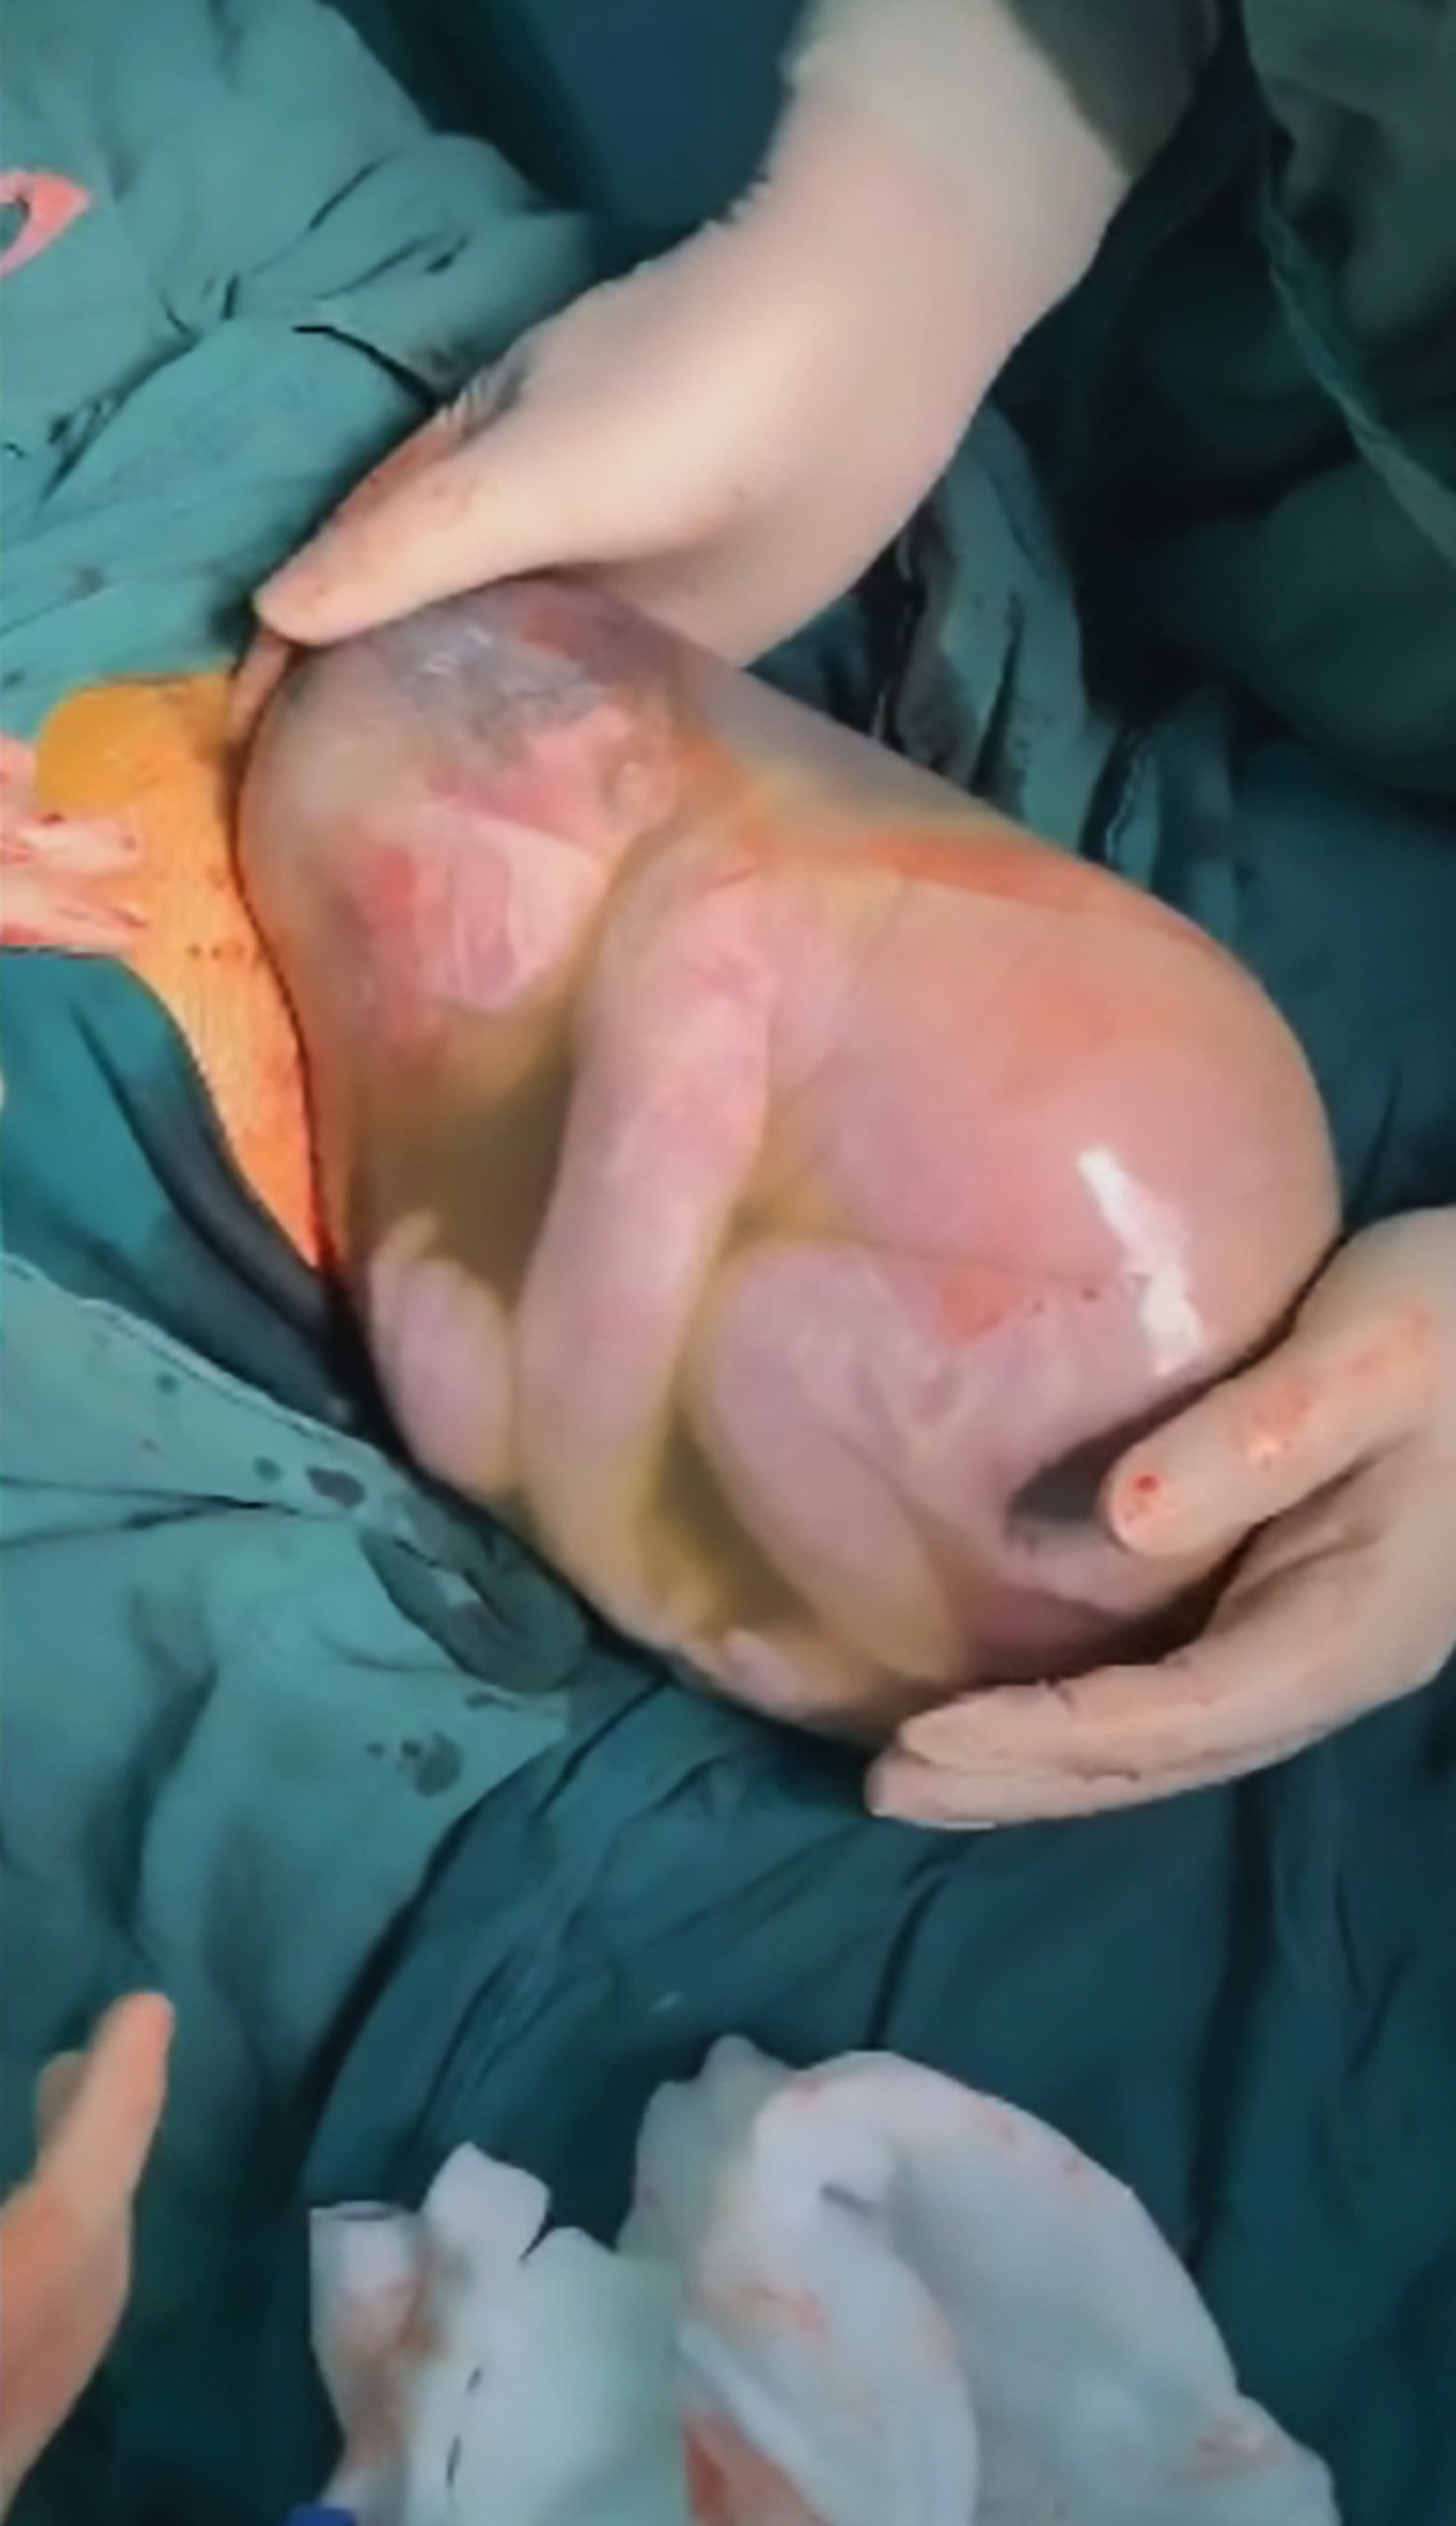 Amazing moment child is born while still inside Amniotic Sac